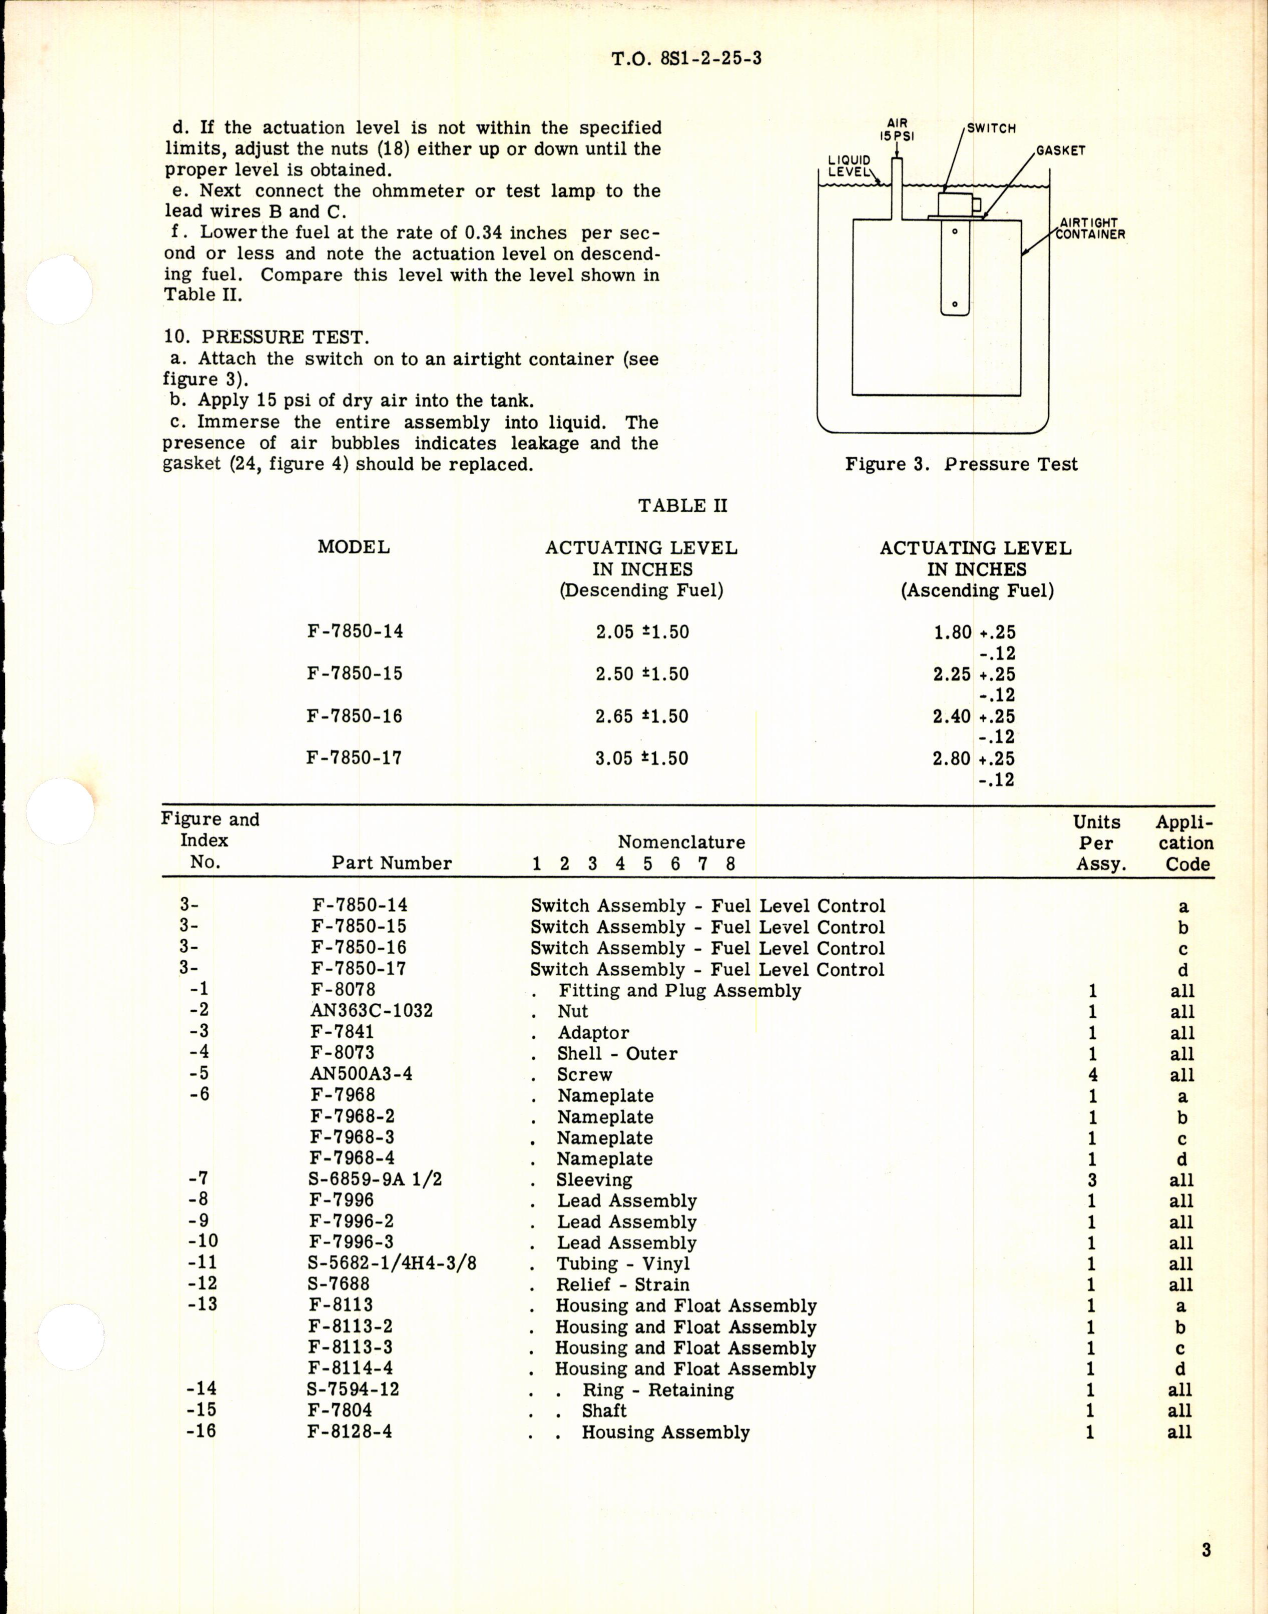 Sample page 3 from AirCorps Library document: Switch Assembly, Fuel Level Control